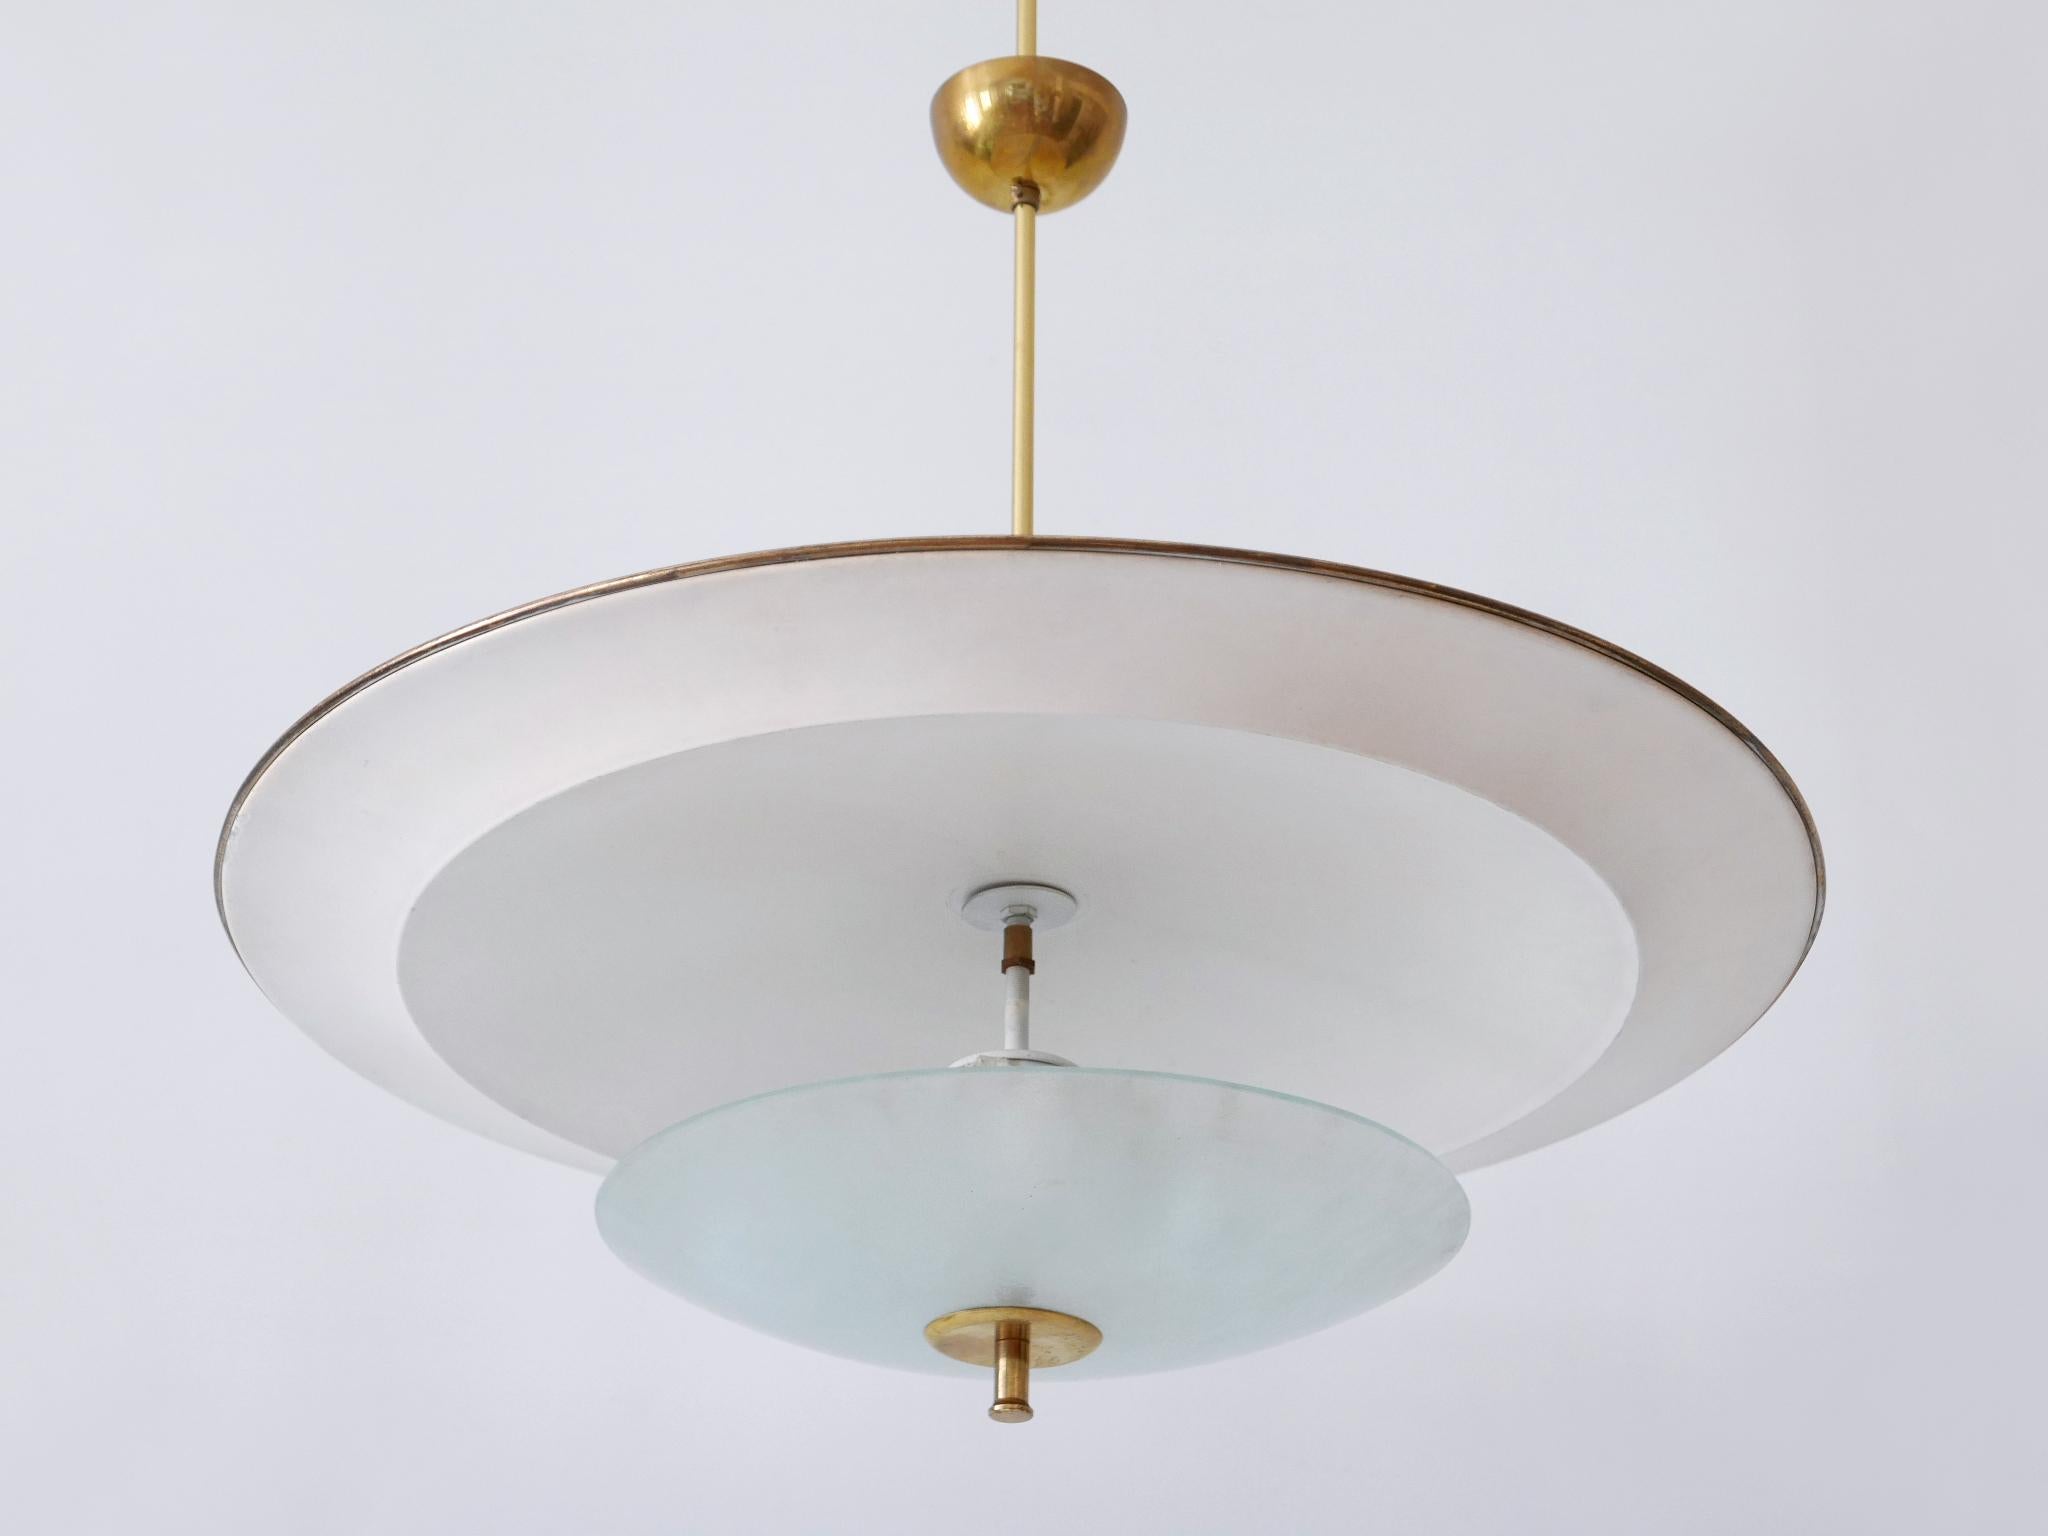 Large, rare and highly decorative Mid-Century Modern 'Ufo' ceiling light or pendant lamp. Designed & manufactured in Germany, 1950s.

Executed in aluminum sheet, textured glass and brass, the pendant lamp needs 2 x E27 / E26 Edison screw fit bulbs.